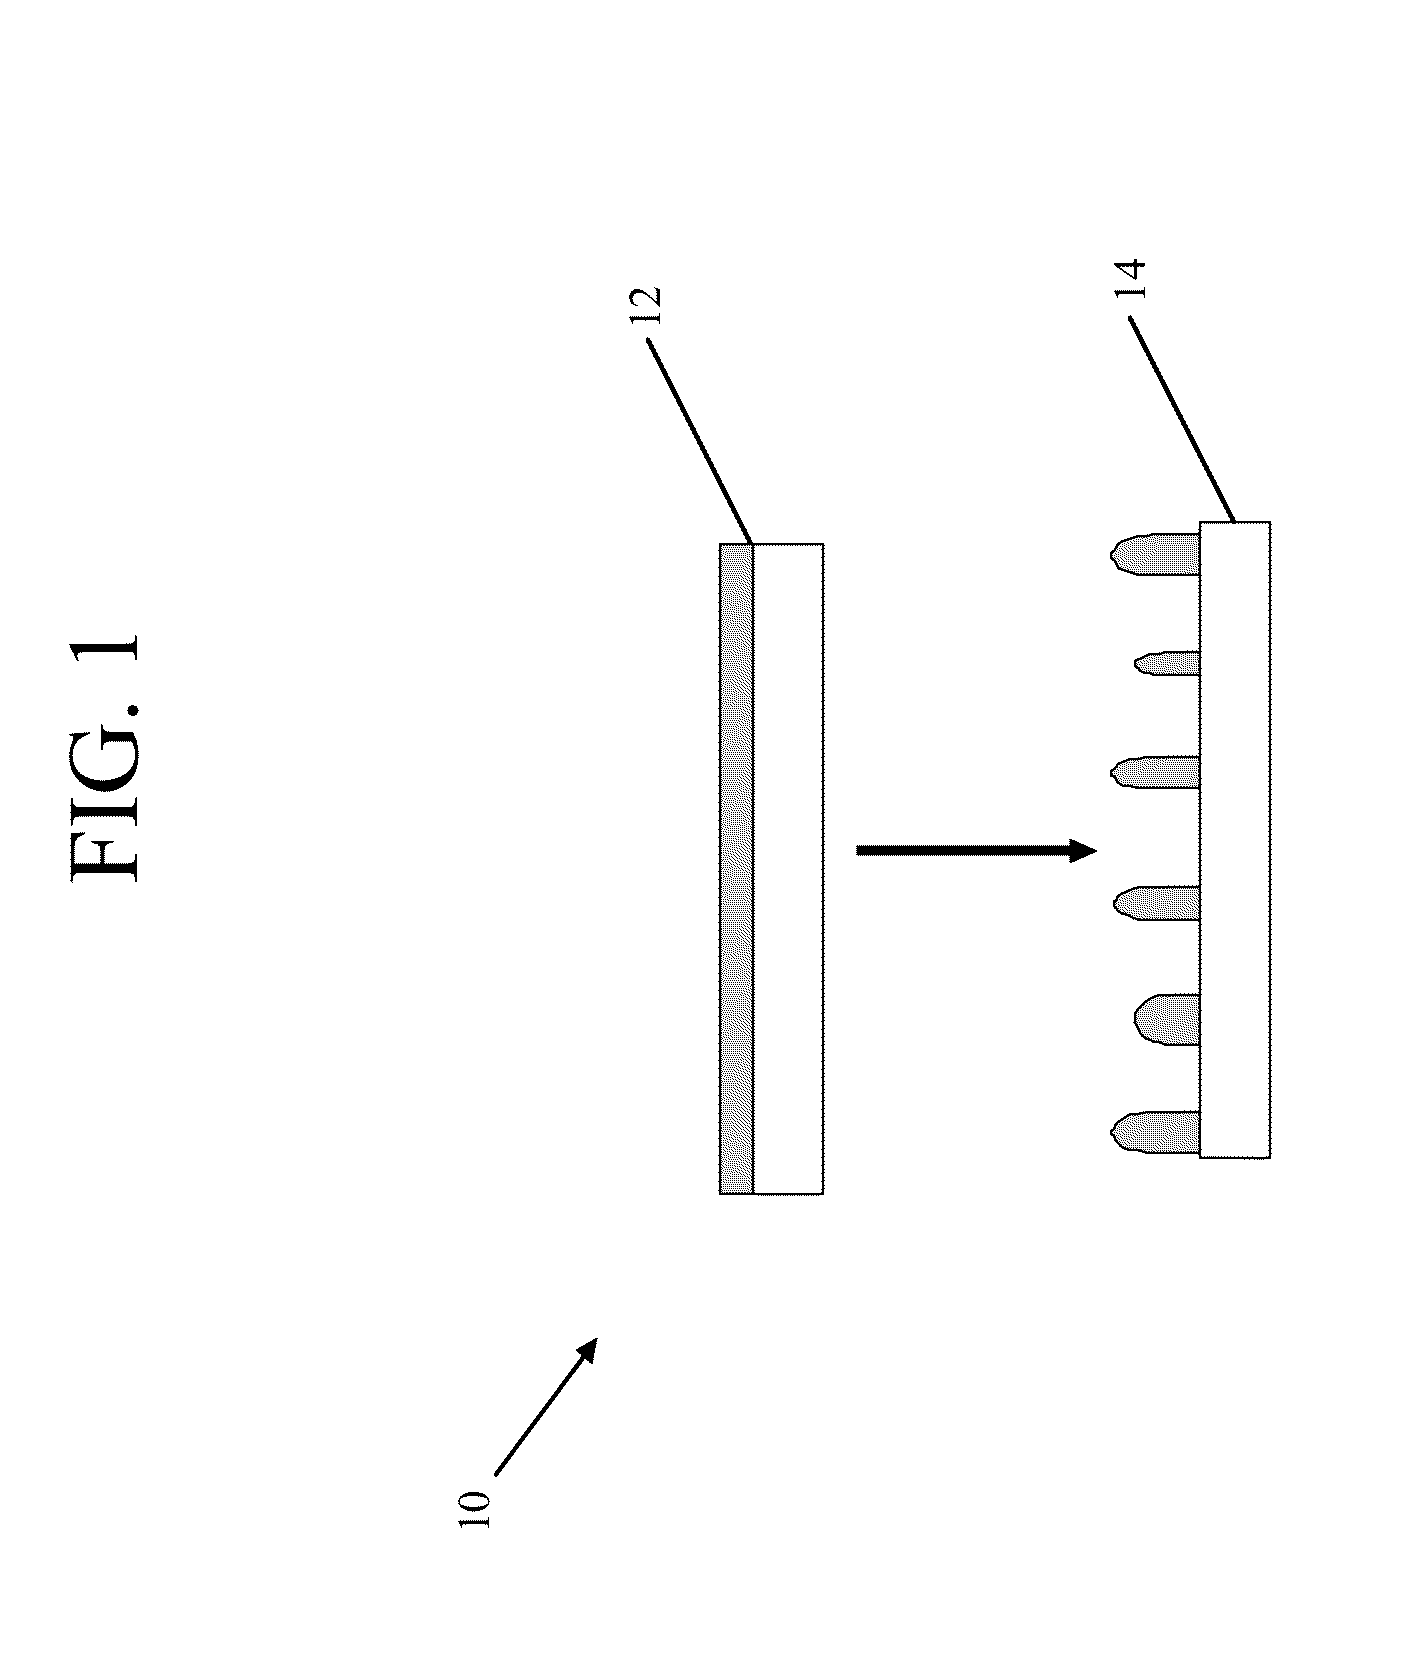 Textured surfaces and methods of making and using same